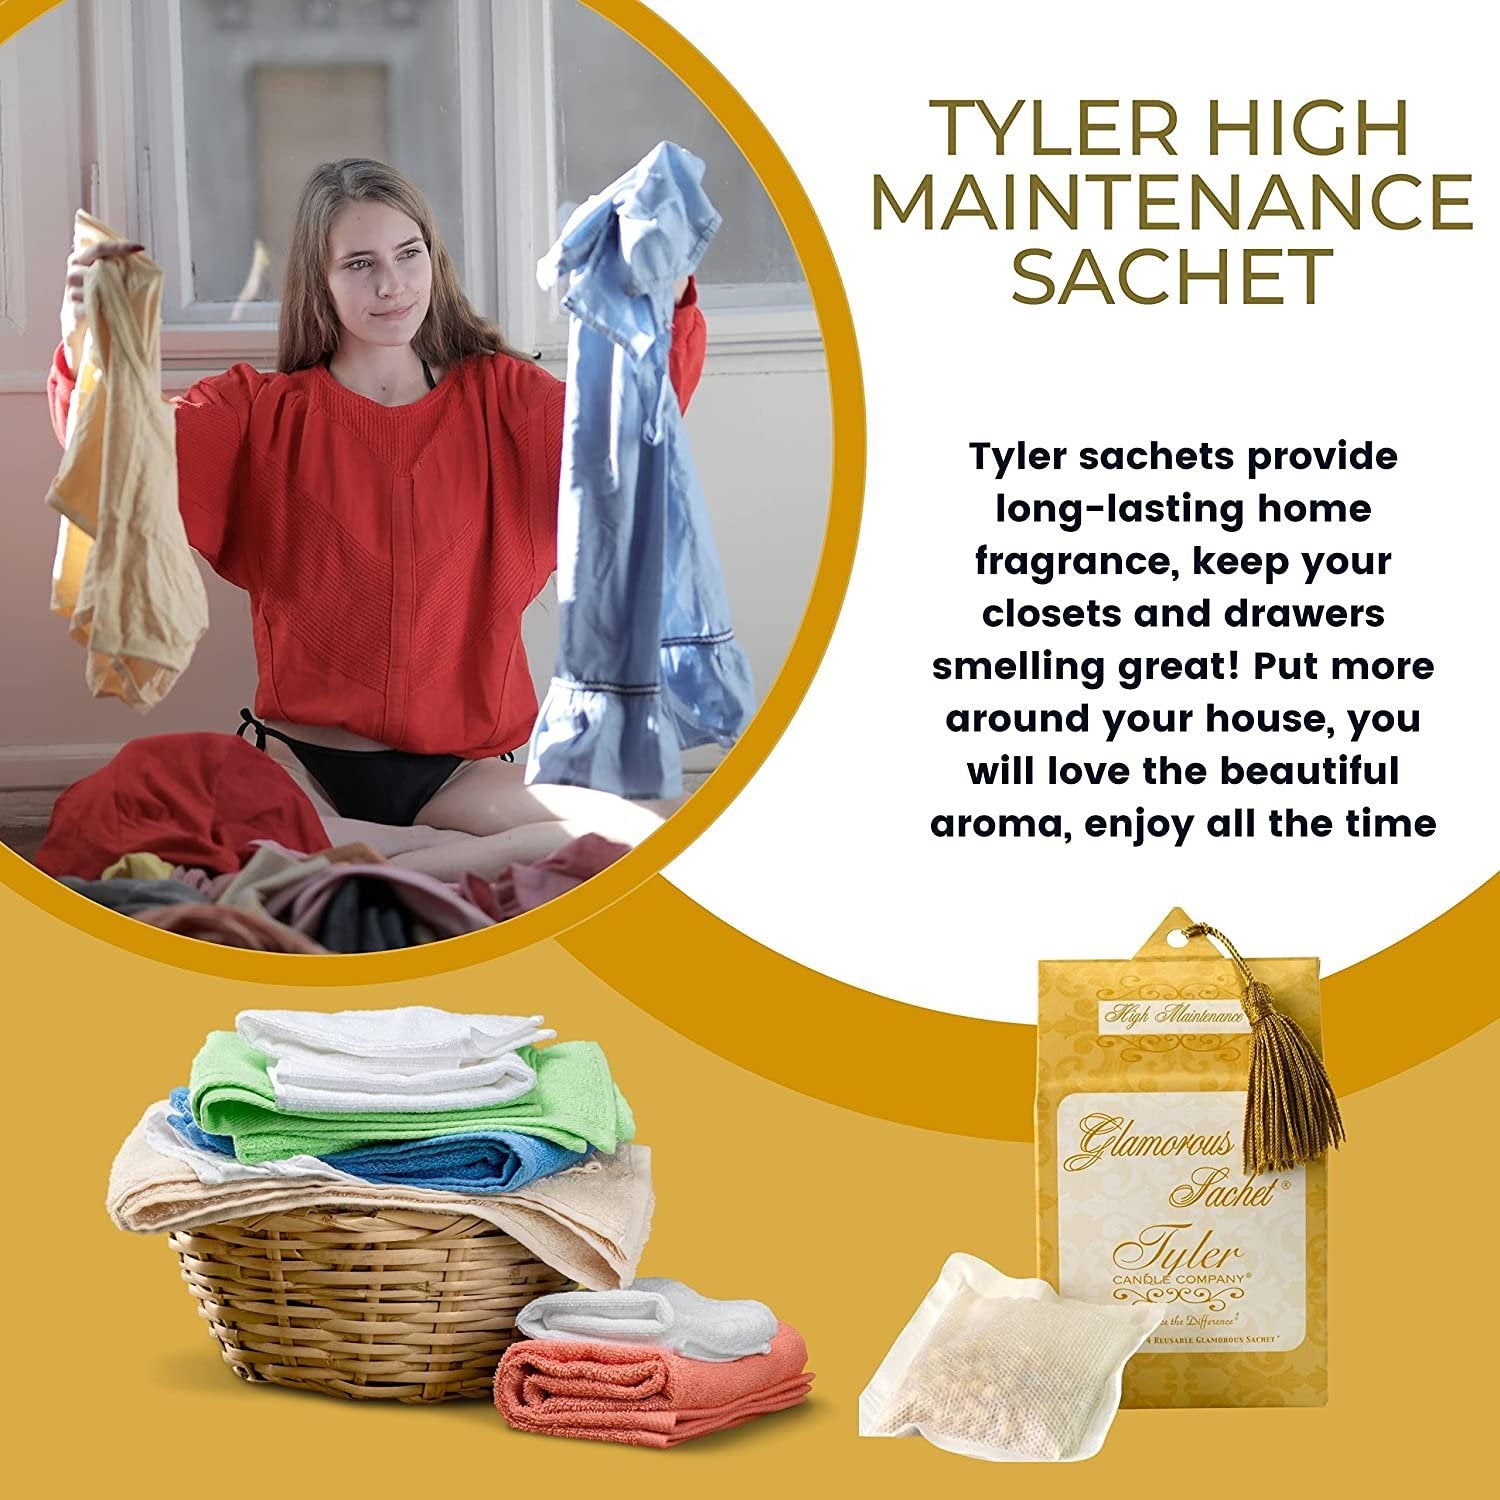 Tyler Candle Company High Maintenance Dryer Sheet Sachets - Glamorous Reusable Dryer Sheets - Sachets for Drawers and Closets - 1 Pack, 4 Sachets, Dryer, Home, or Personal Sachet, with Bonus Key Chain